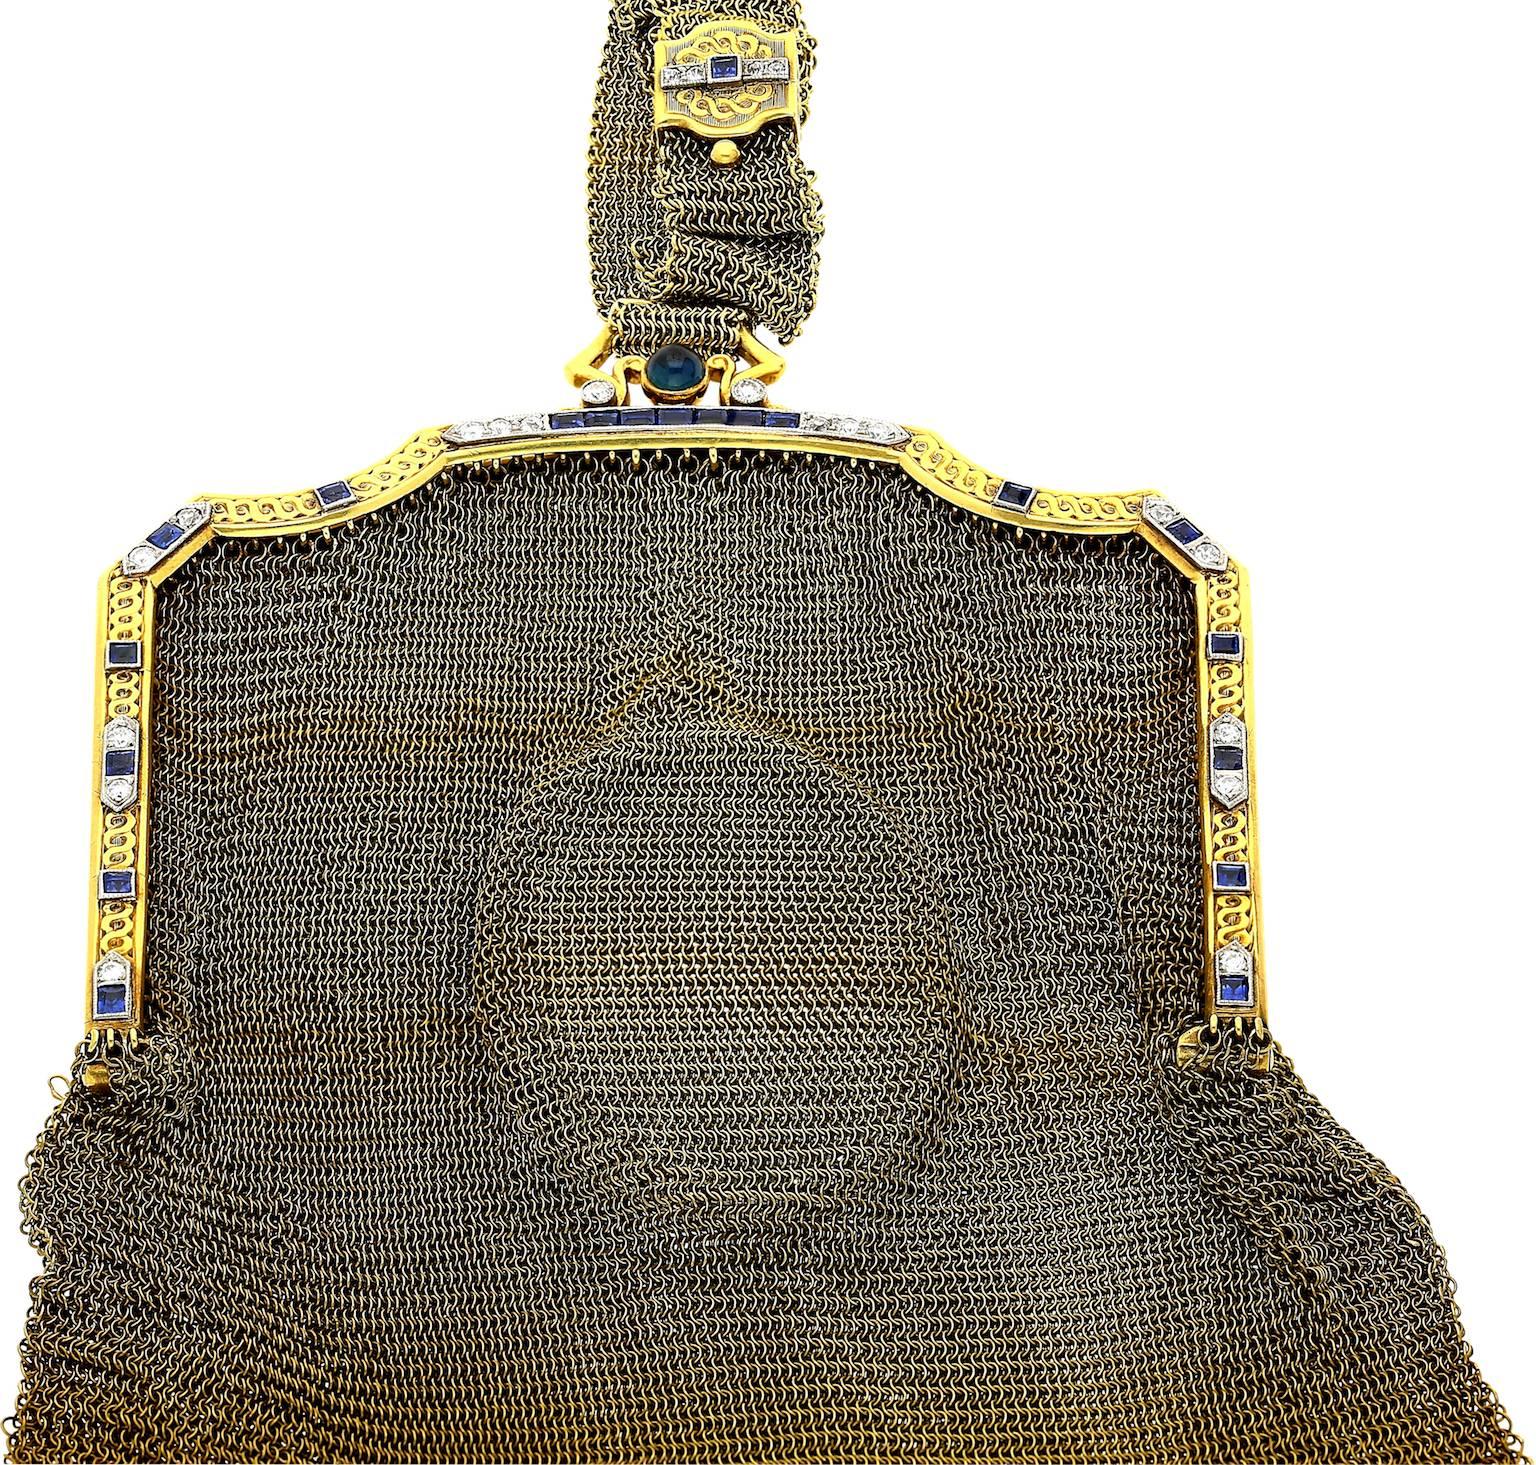 Woven Mesh Bag set in 14k Yellow Gold and Platinum.
Accented by French-cut Diamonds and step-cut/cabuchon Sapphires
Art Deco Era with Powder Mirror. Mesh strap. 